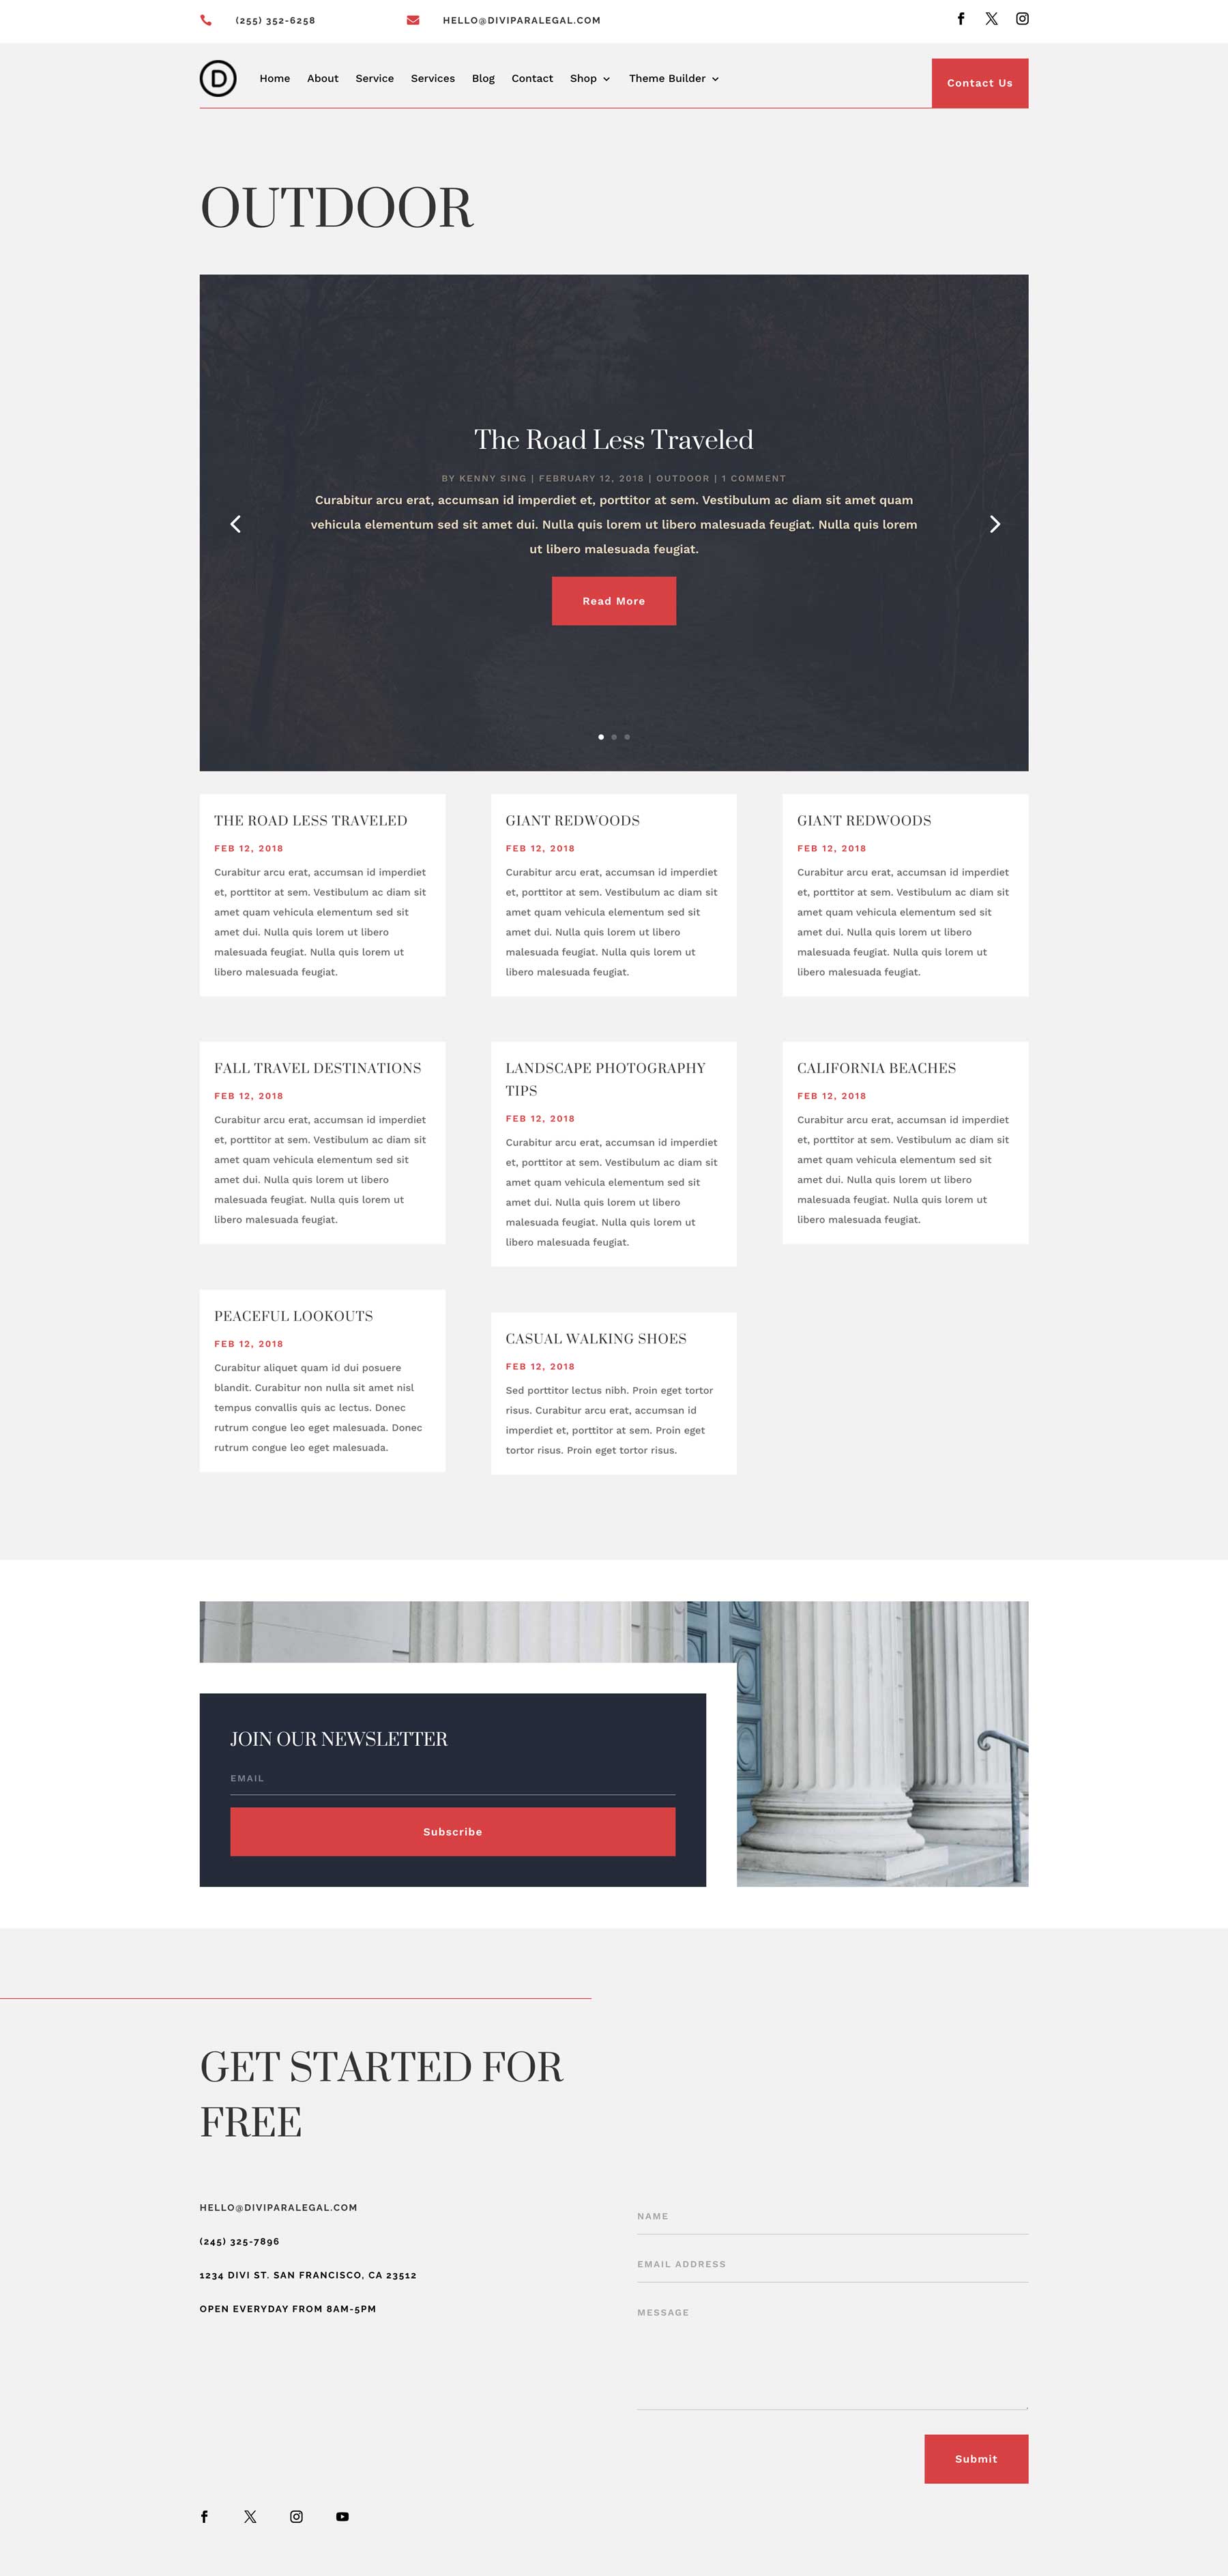 Paralegal theme builder pack